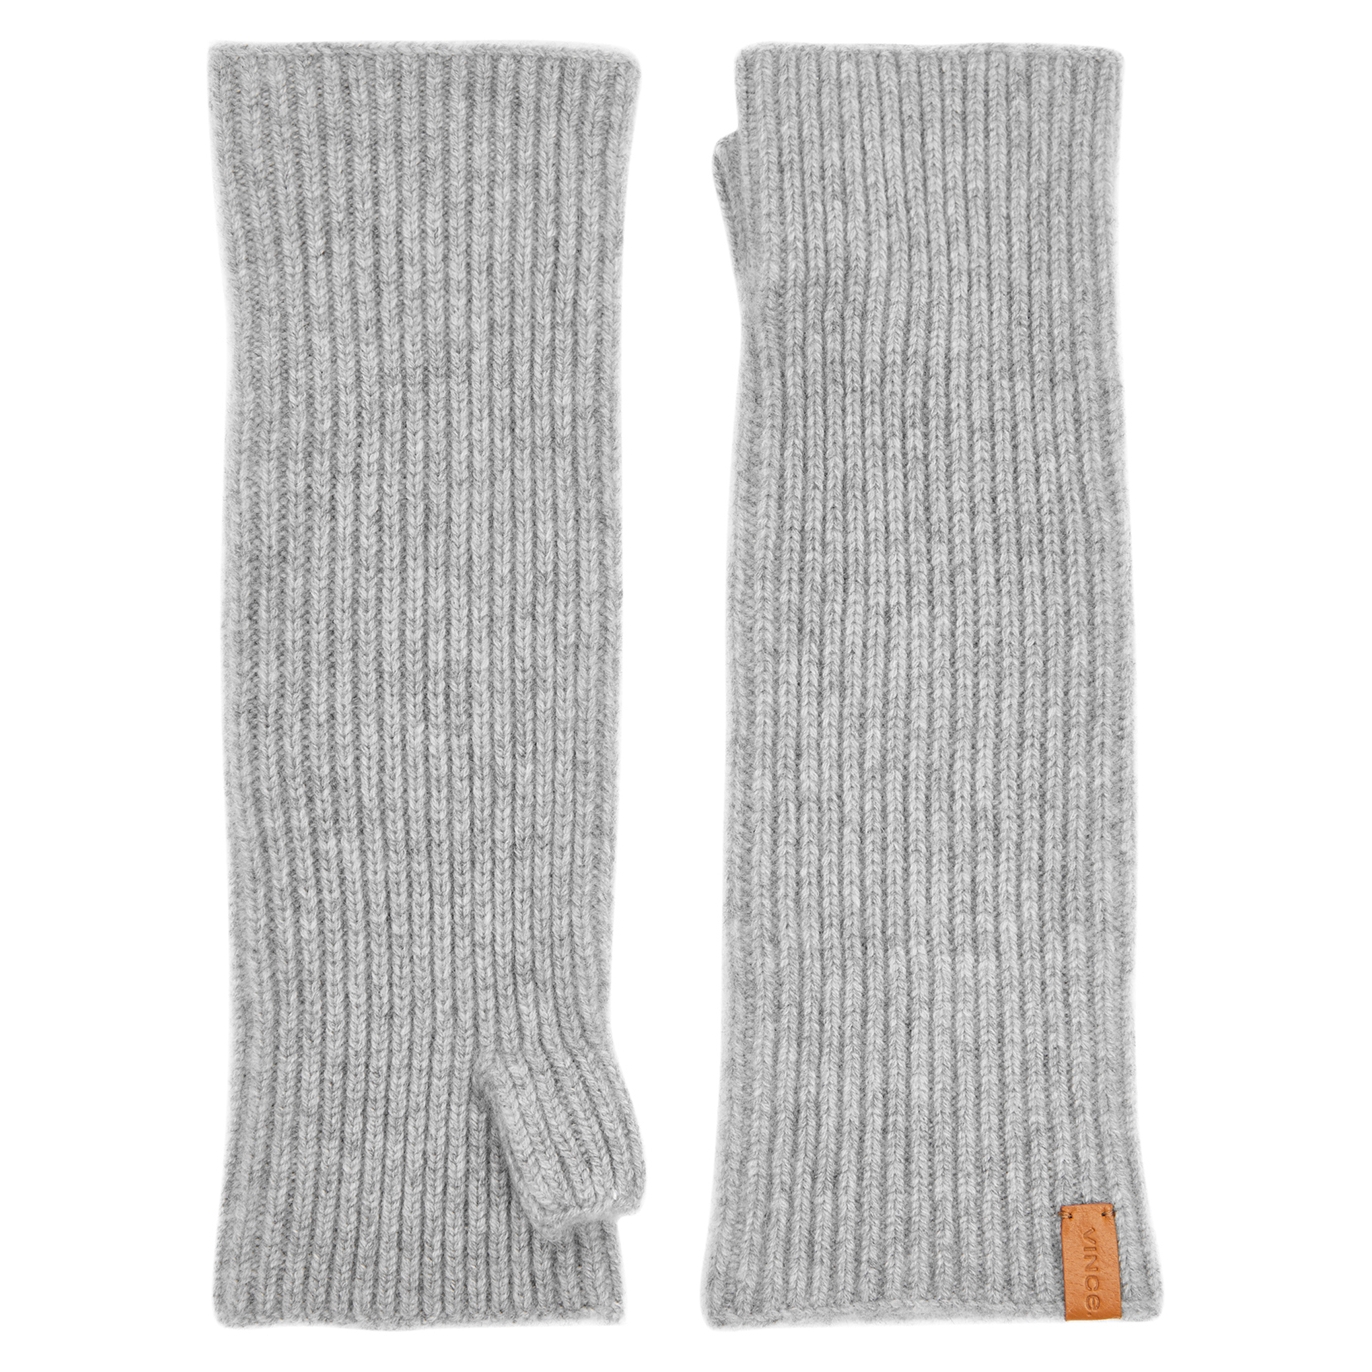 Vince Boiled Cashmere Fingerless Gloves - Grey - One Size